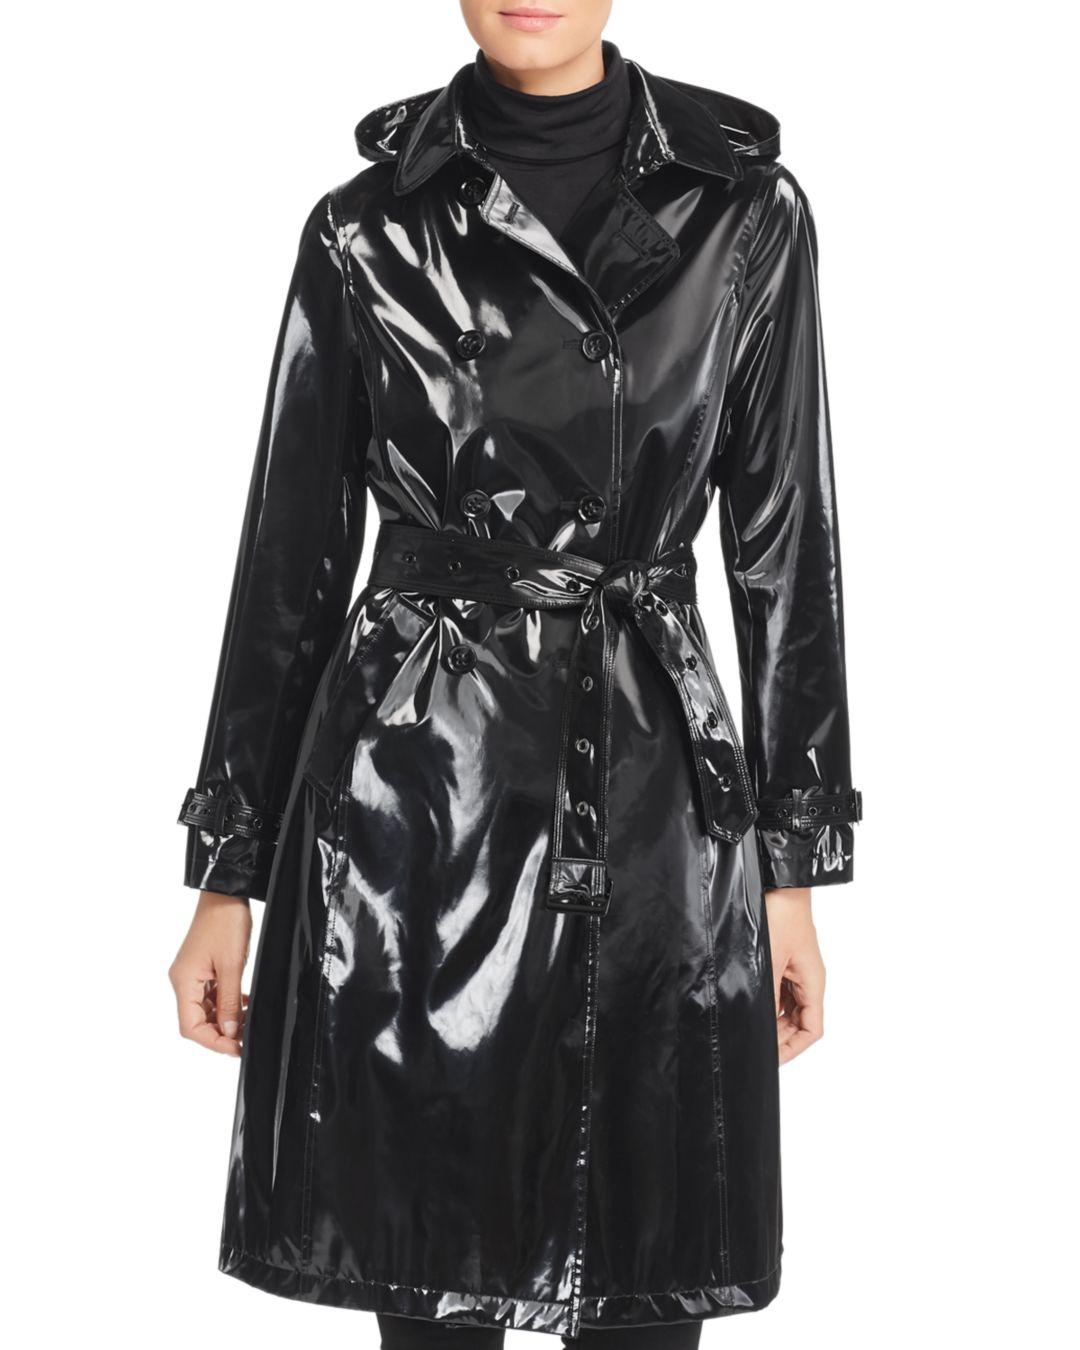 Jane Post High Gloss Trench Coat in Black - Lyst